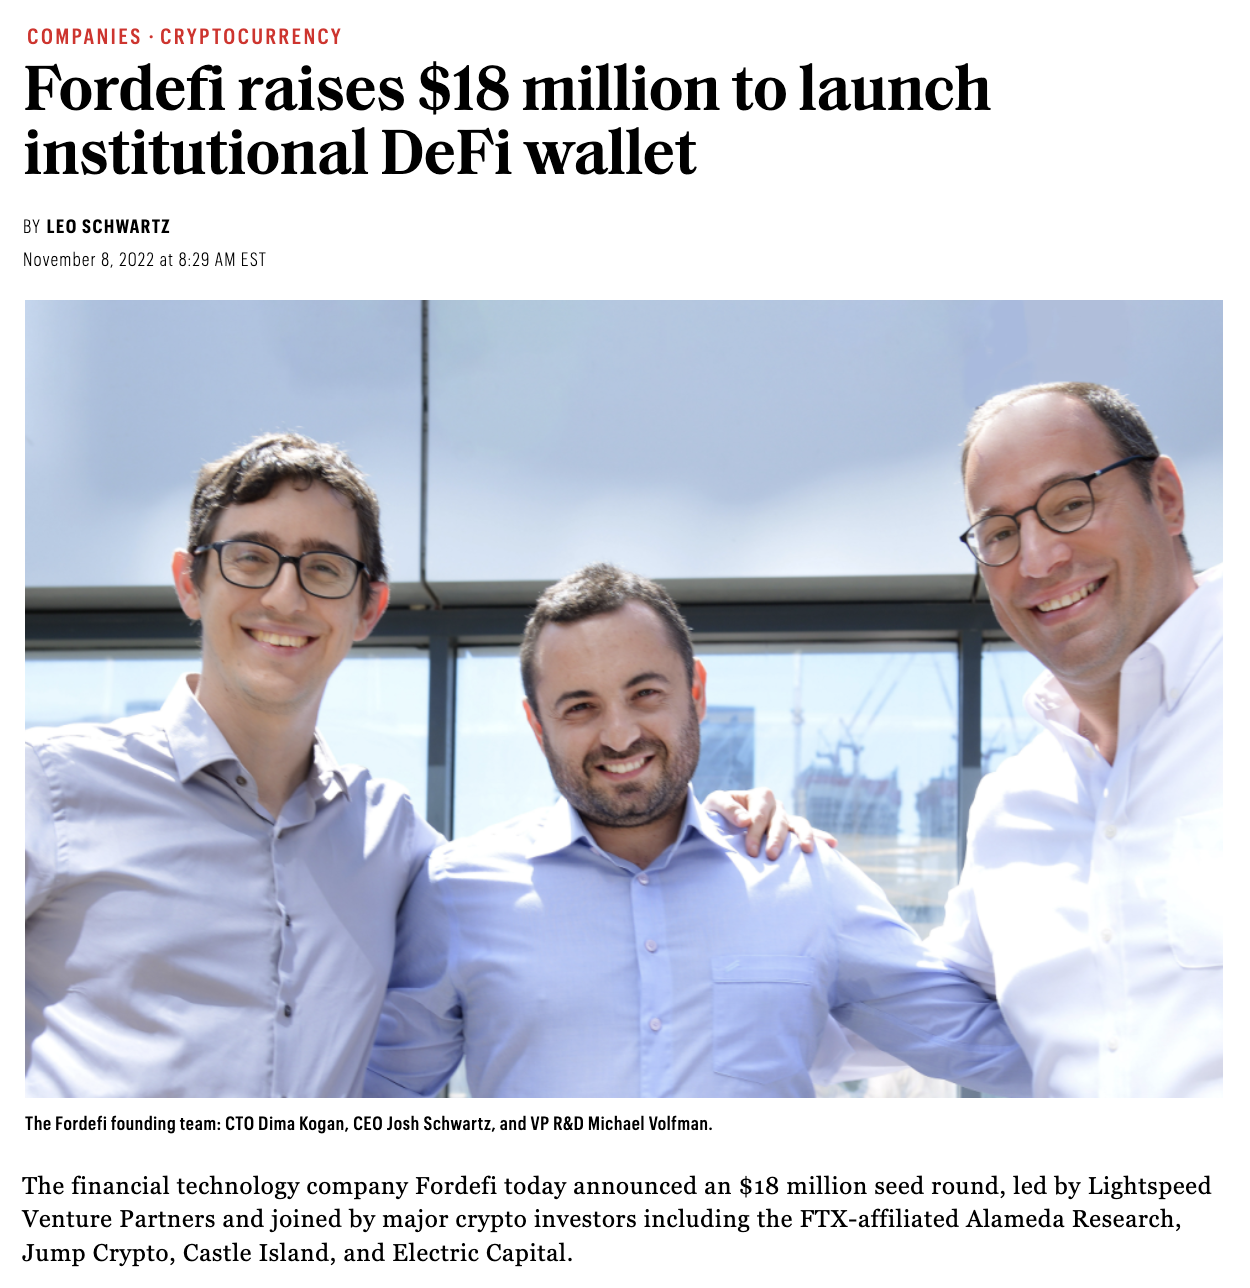 Fordefi launches DeFi Wallet